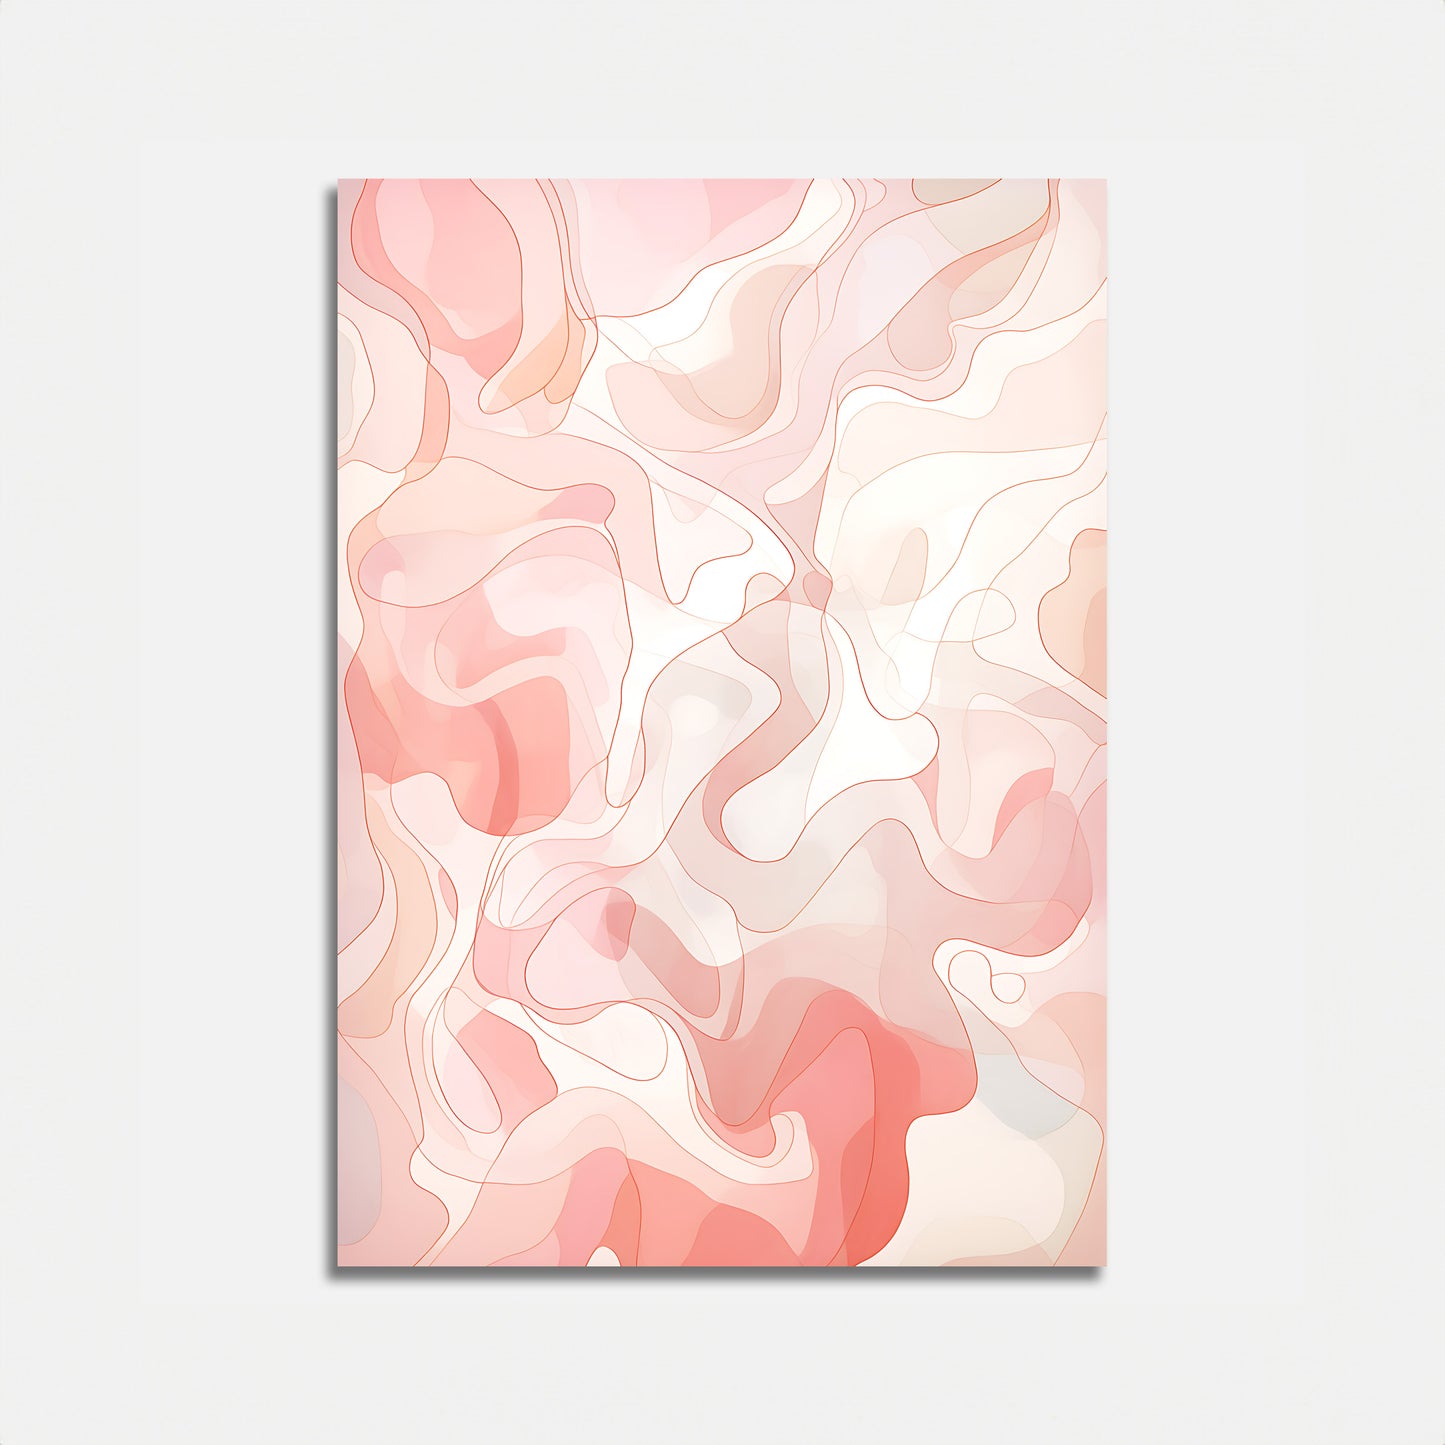 Abstract painting with swirling pink and beige patterns on canvas.